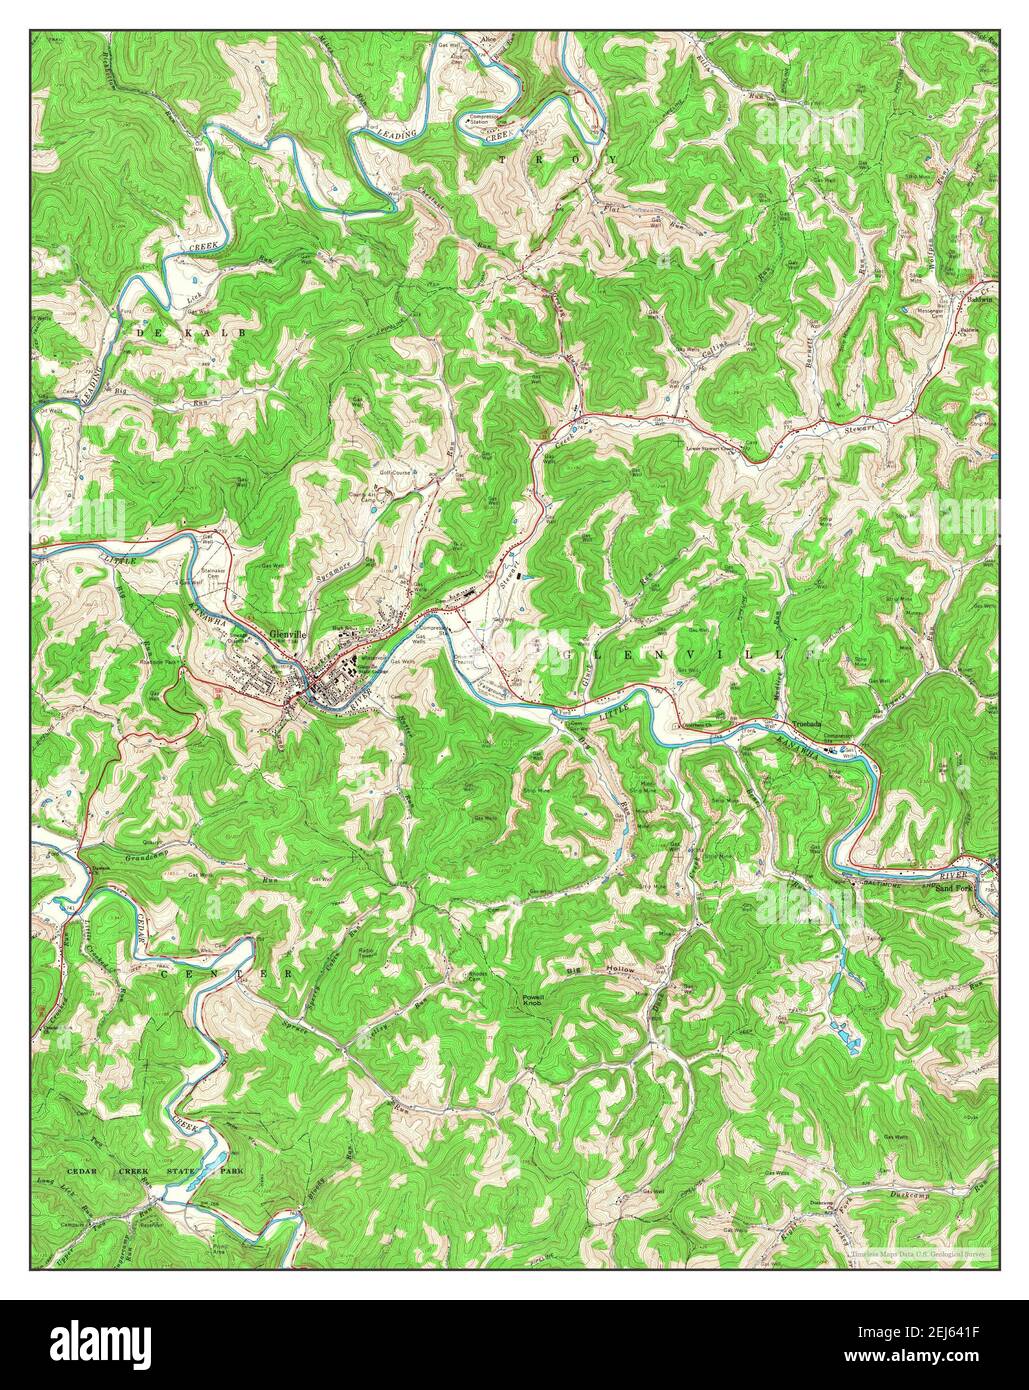 Glenville, West Virginia, map 1965, 1:24000, United States of America by Timeless Maps, data U.S. Geological Survey Stock Photo